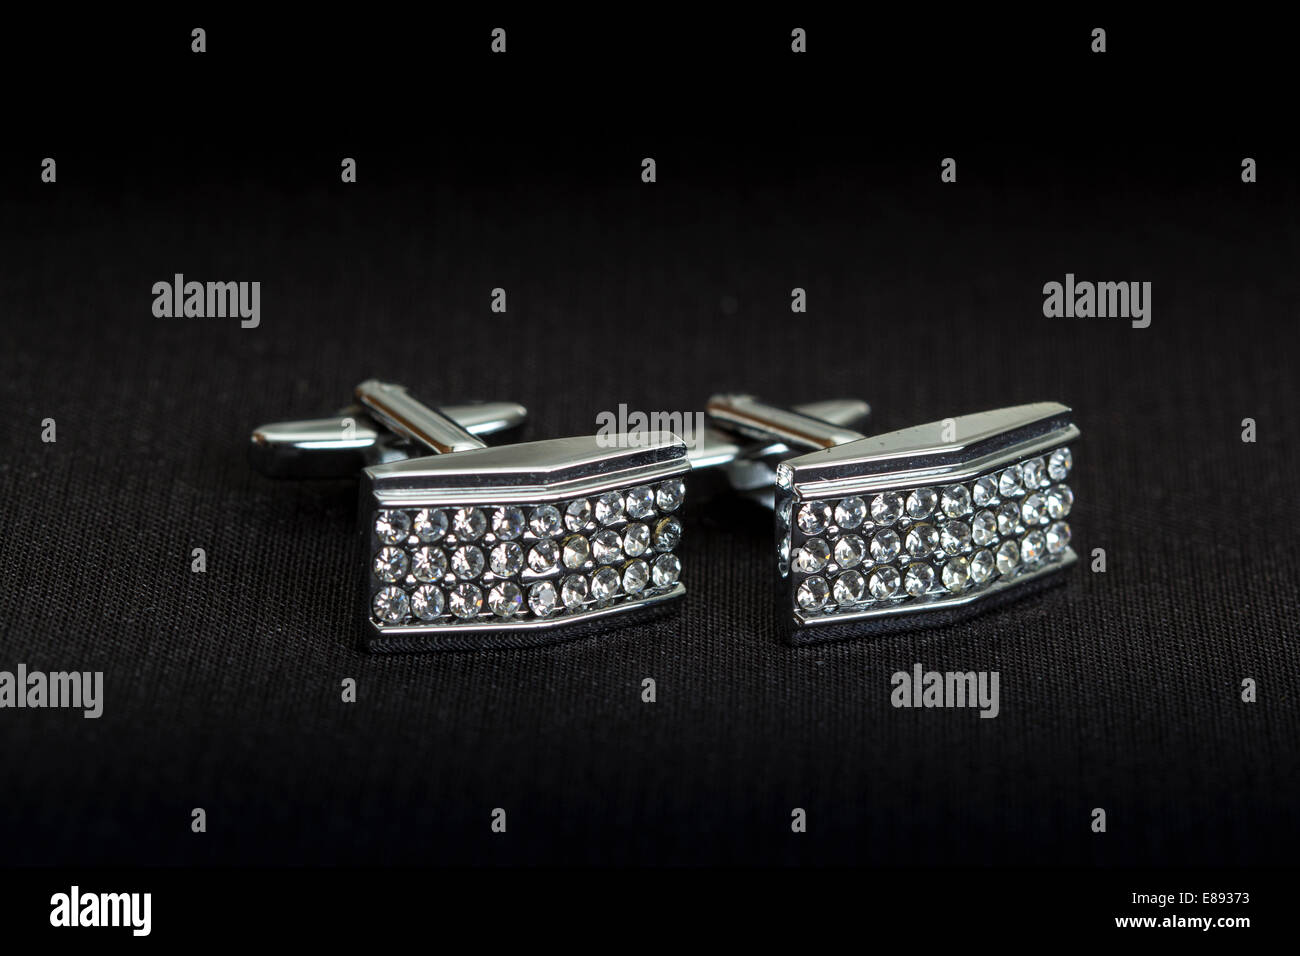 Pair of silver cuff links over black background Stock Photo